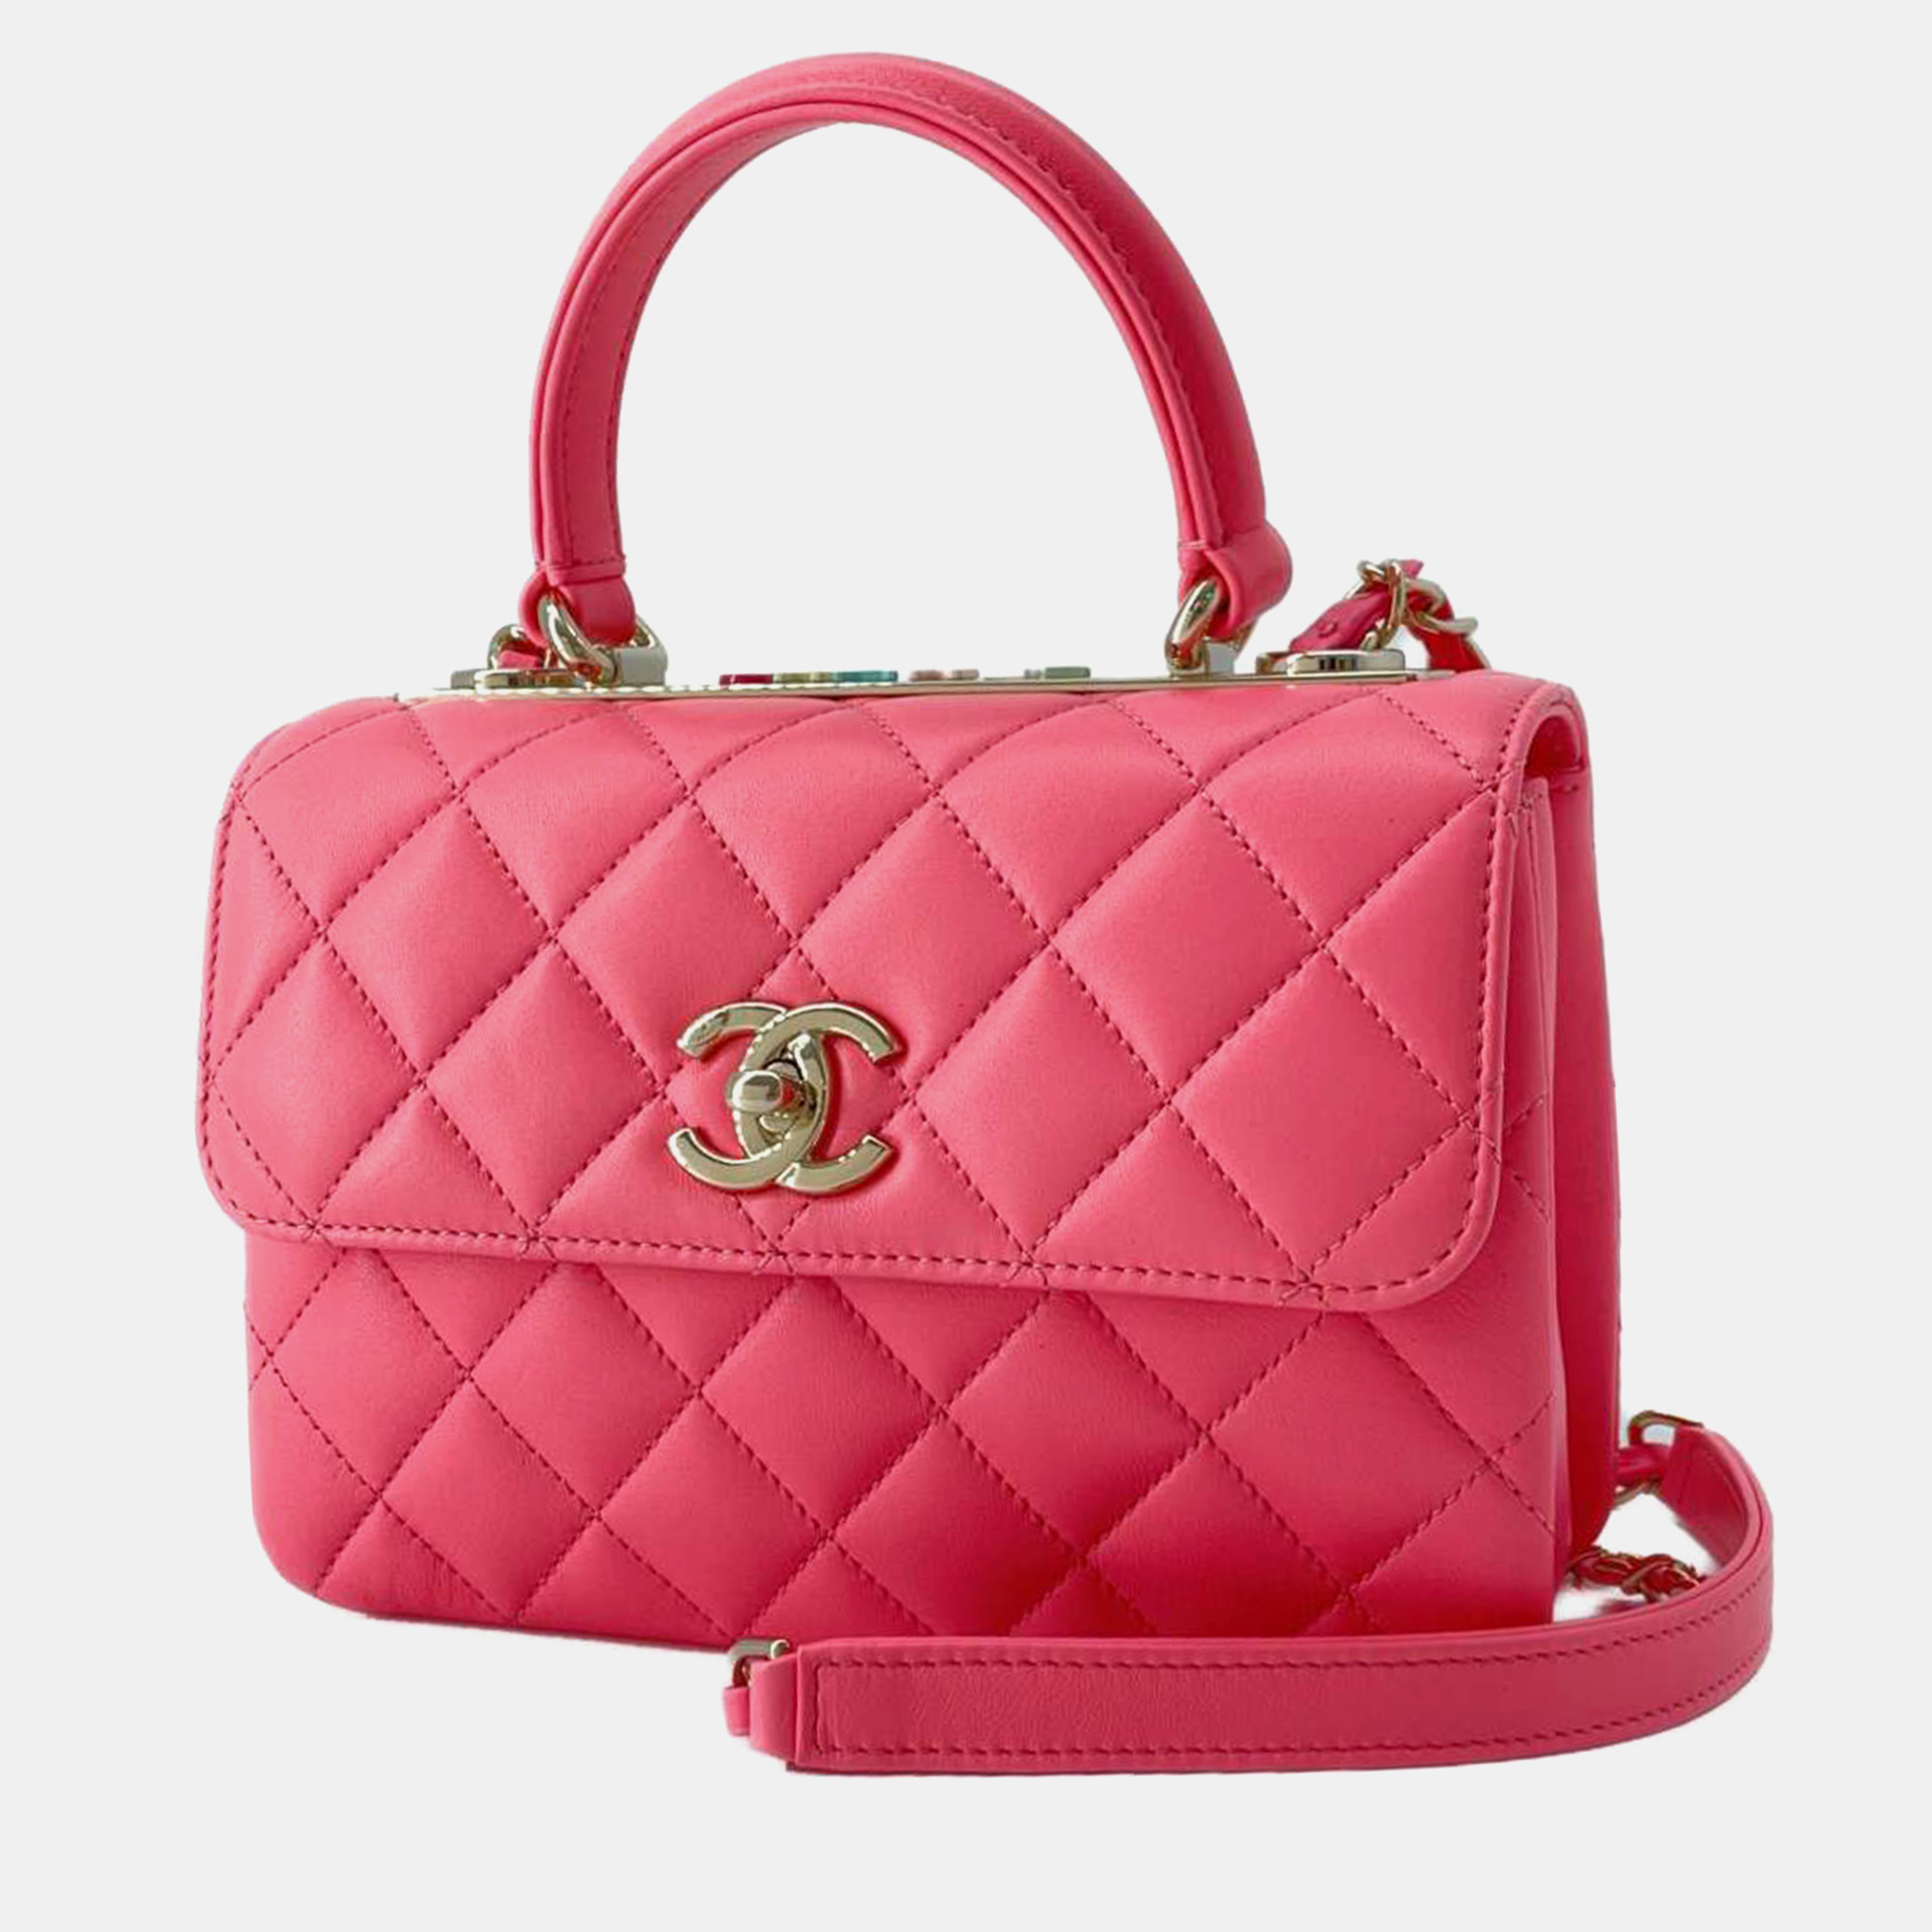 Pre-owned Chanel Lambskin Leather Medium Trendy Cc Flap Bag In Pink